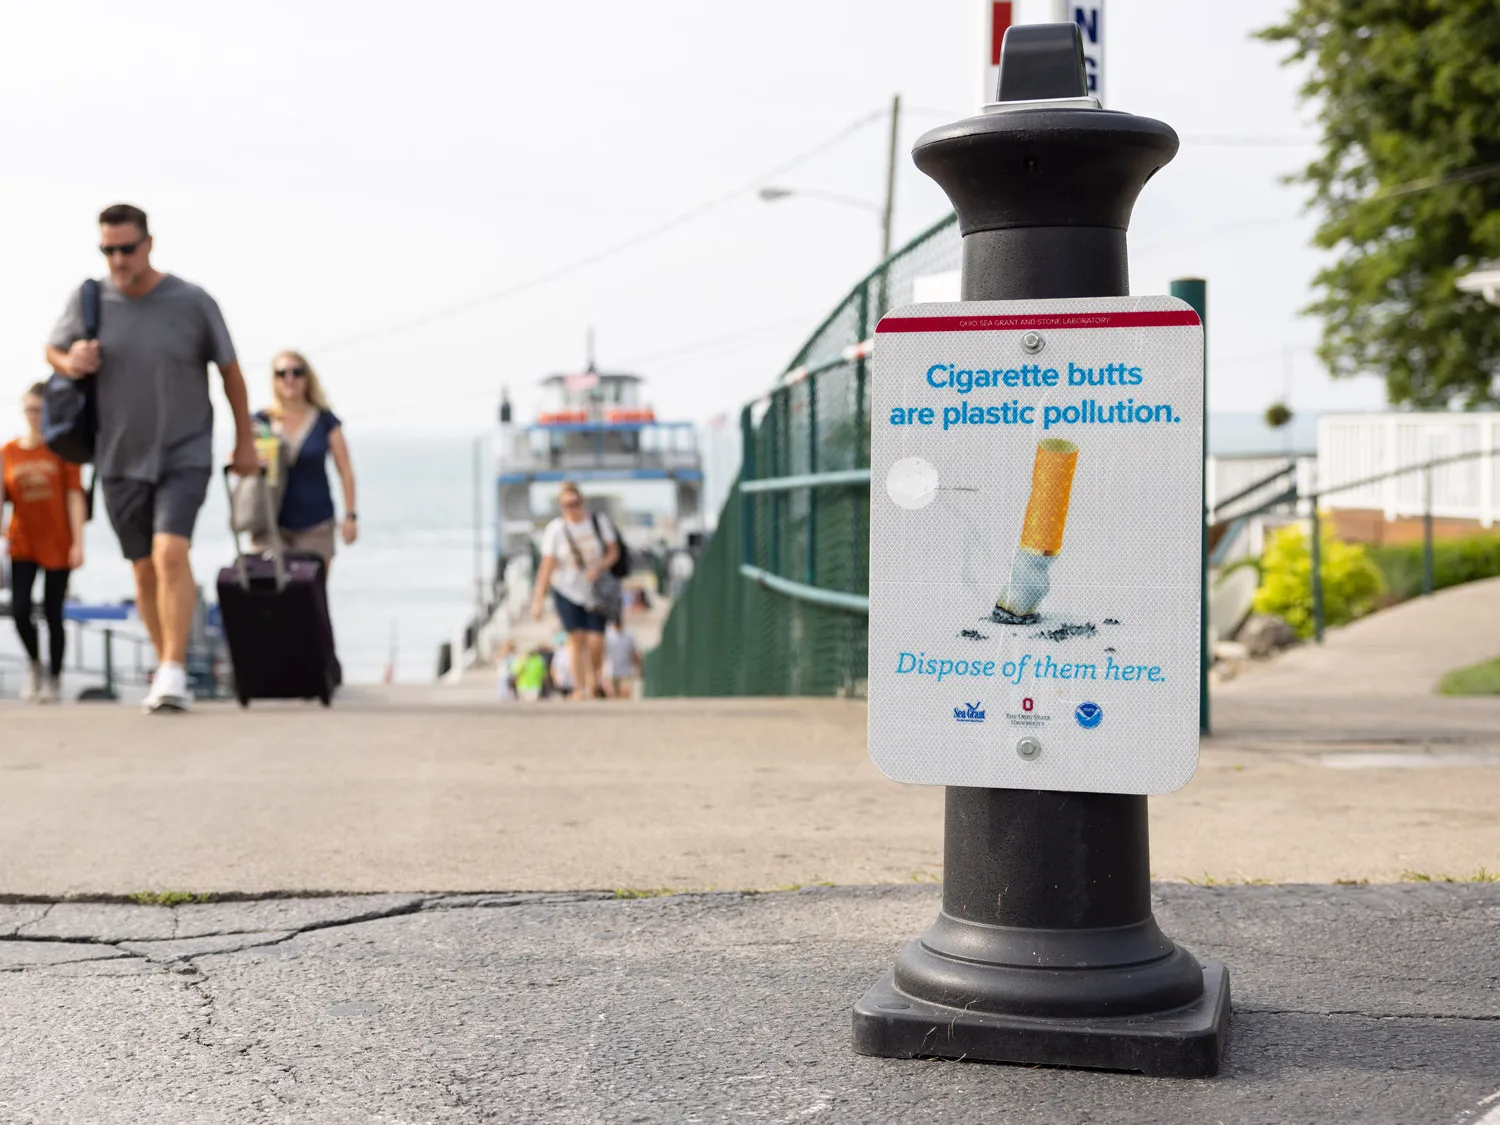 A sign says Cigarette butts are plastic pollution. Dispose of them here. The sign shows a cigarette butt being stamped out, and the trash receptacle it hangs on stands next to path where people walk onto the island from ferries. A handful of people are out-of-focus in the background.